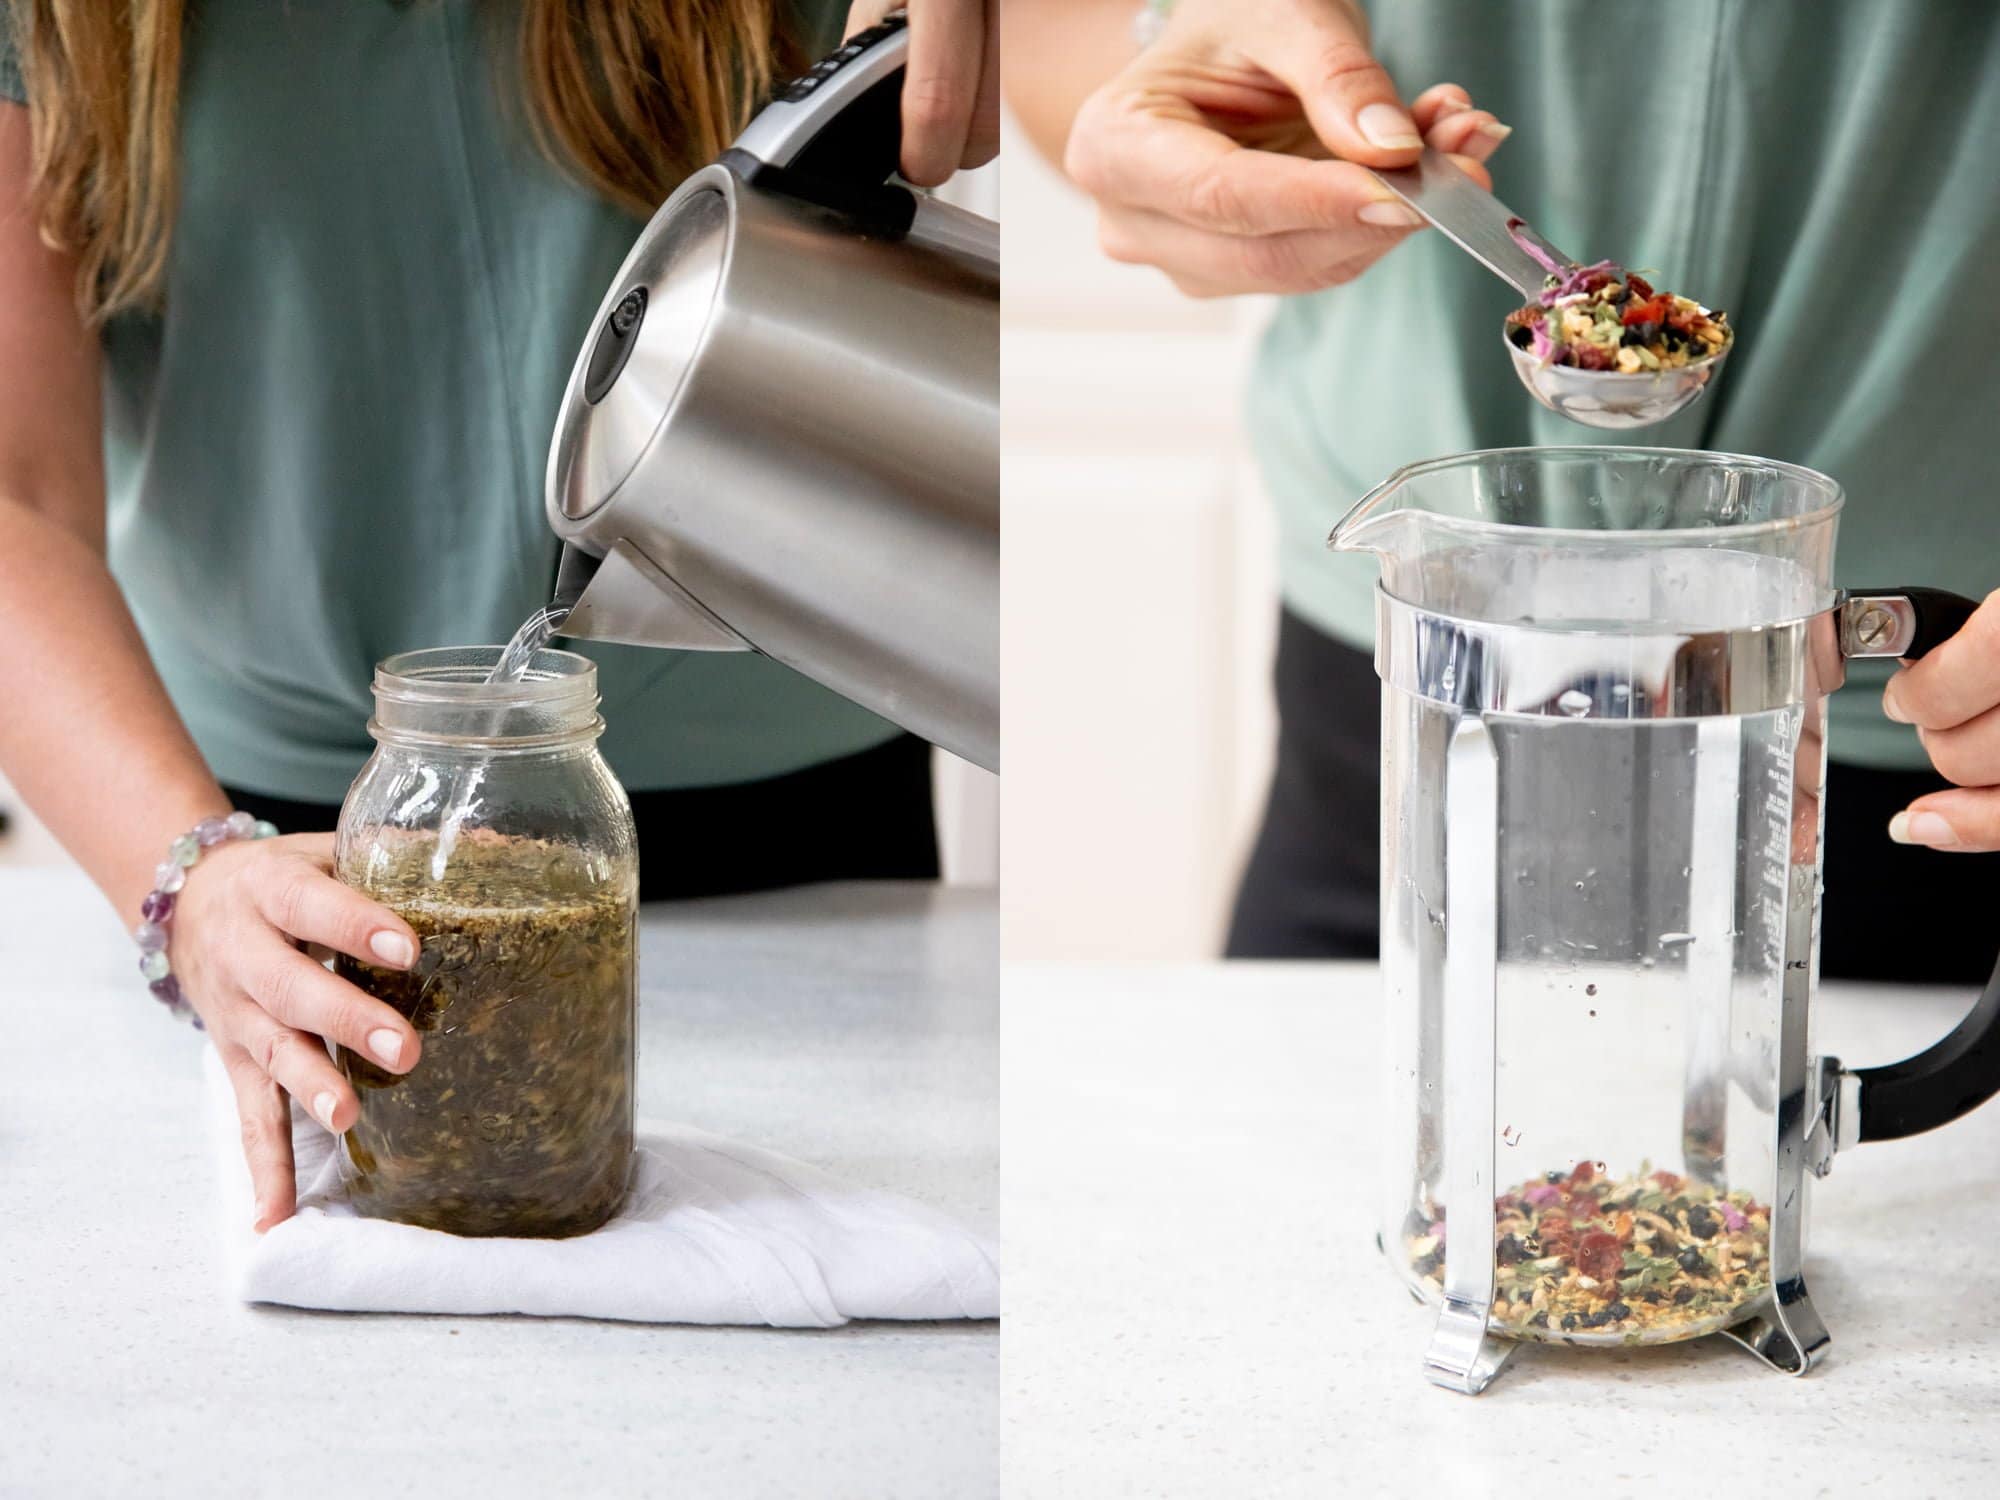 Side-by-side shot of herbal tea being brewed. On the left, tea is being poured into a mason jar. On the right, tea is being spooned into a French press.